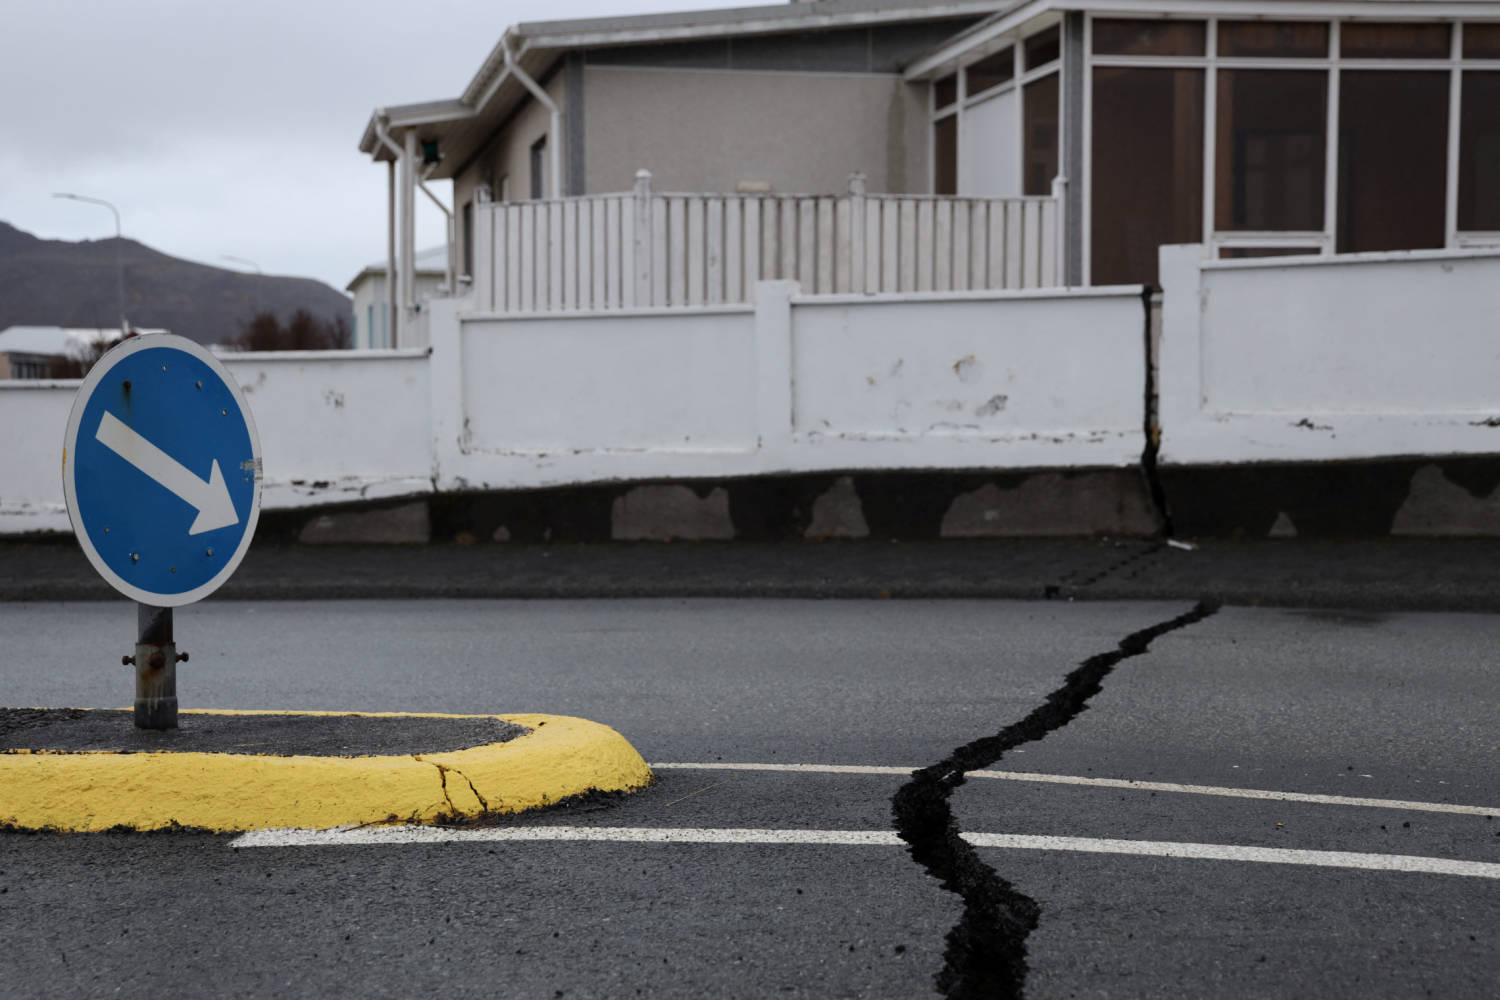 Cracks Emerge On A Road Due To Volcanic Activity Near A Police Station, In Grindavik